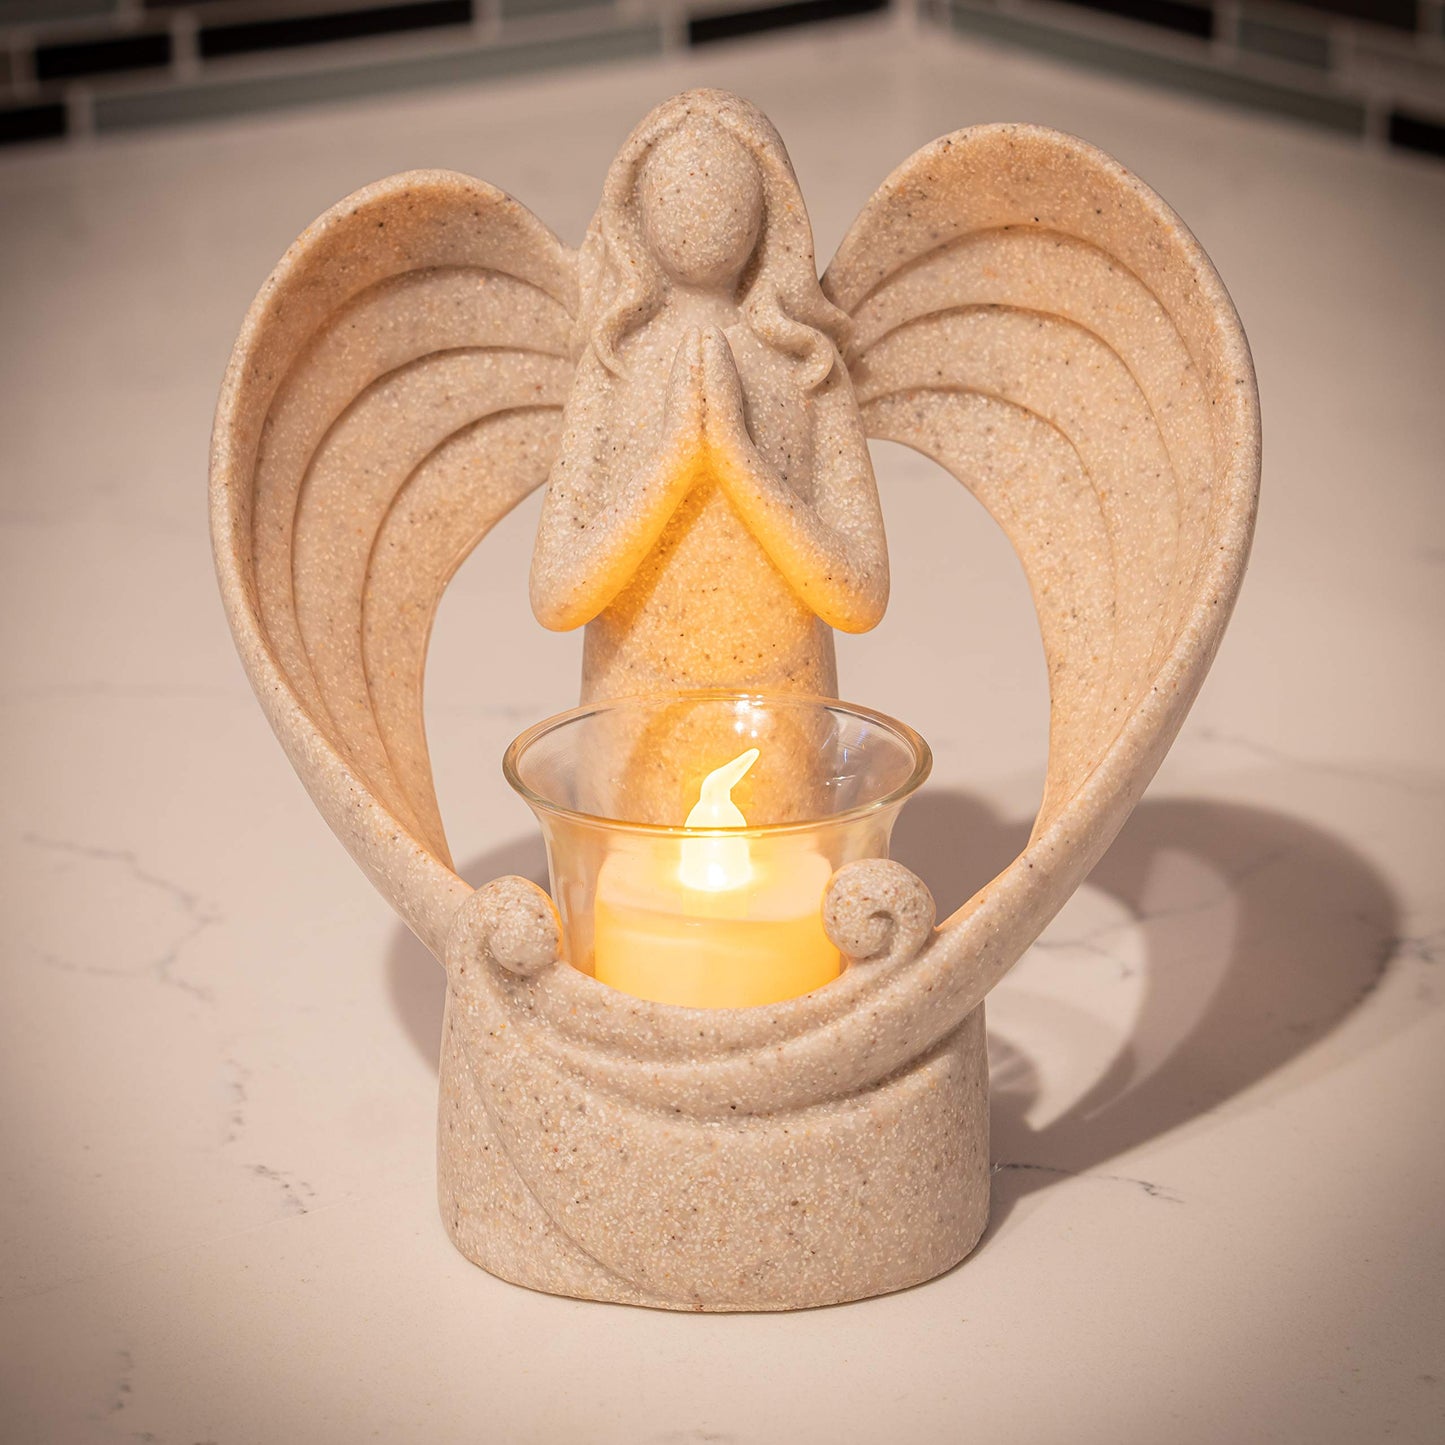 Angel Memorial Gifts Tealight Candle Holder, Sympathy Gift Candle Remembrance Gifts Bereavement Gifts Condolence Gifts Grieving Gifts for Loss of Loved One, Angel Figurines with LED Flickering Candle